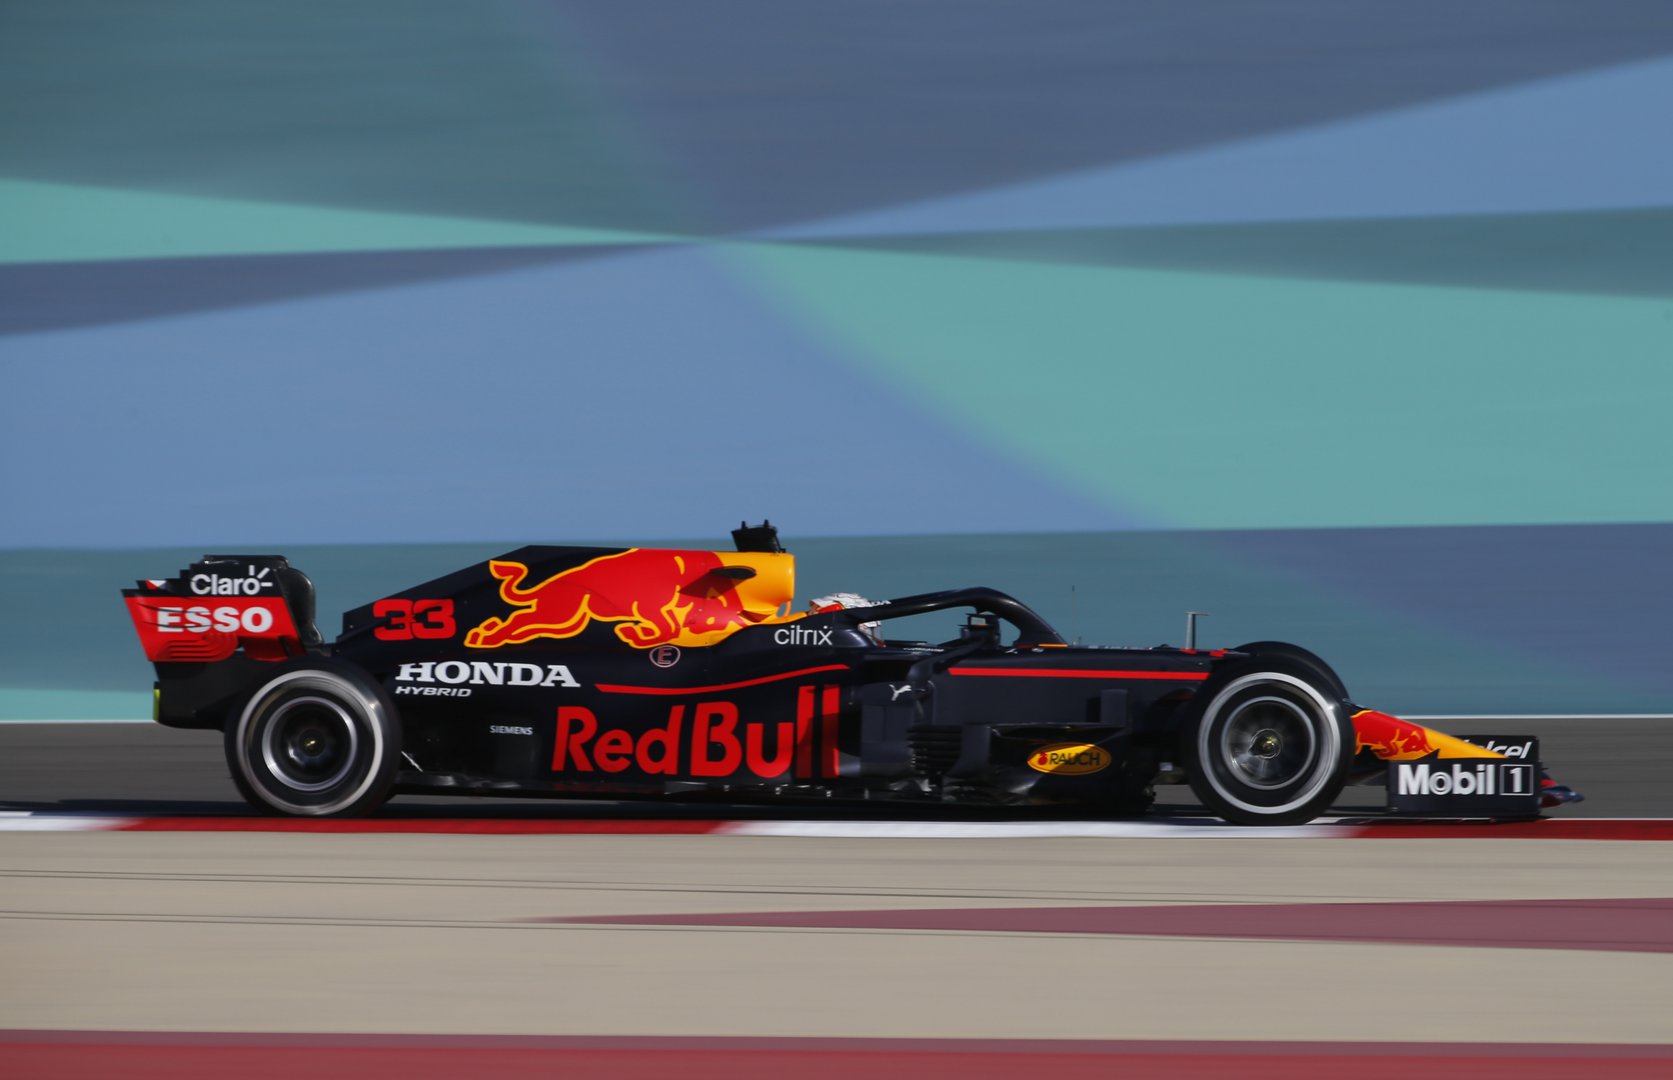 image Verstappen fastest in testing, Mercedes have work to do